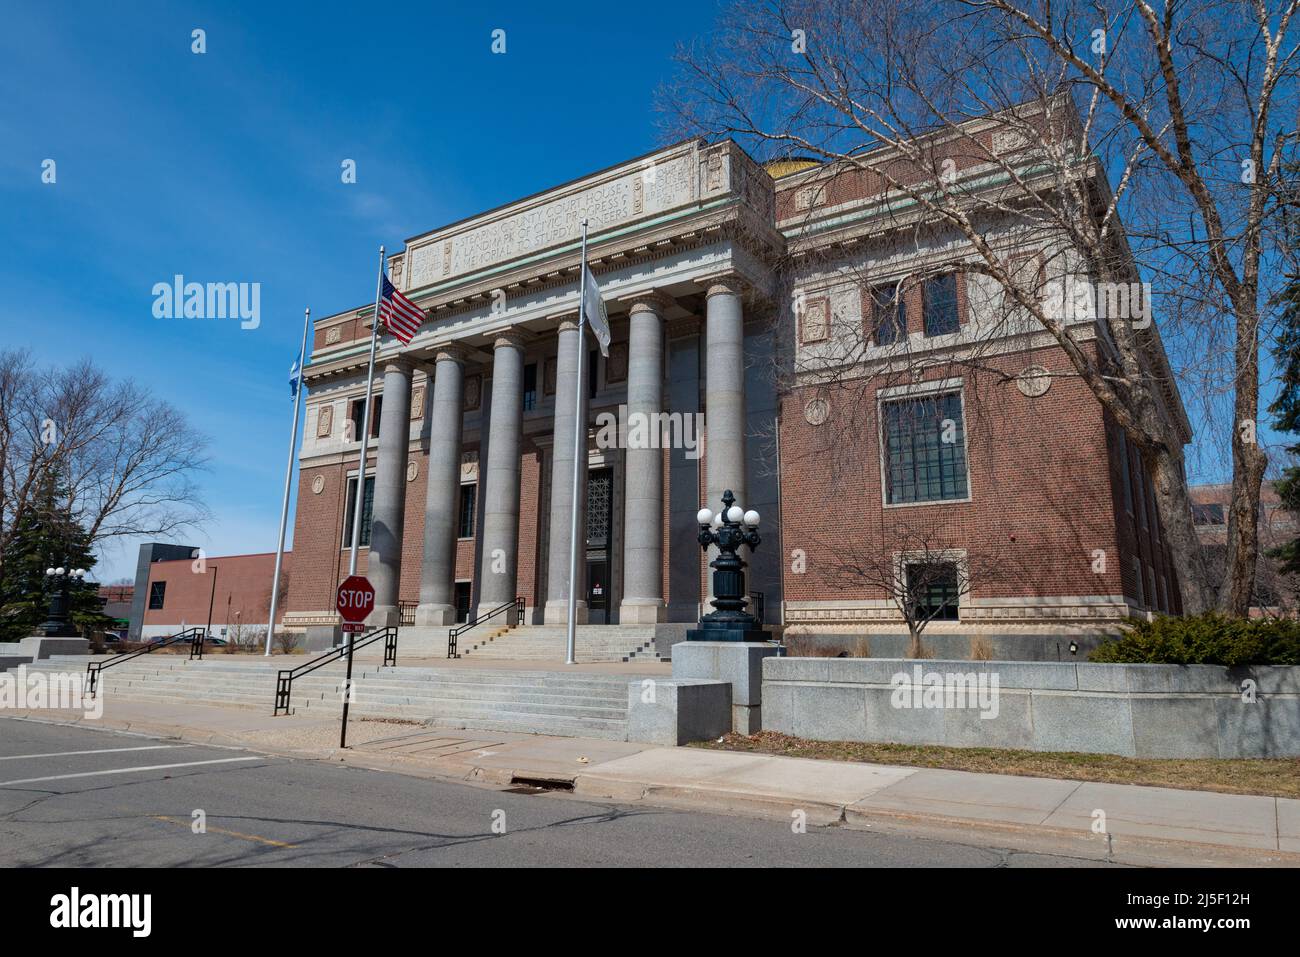 SAINT CLOUD, MINNESOTA - February 19, 2022: the Stearns County Courthouse, located at 725 Courthouse Square, is photographed. Stock Photo